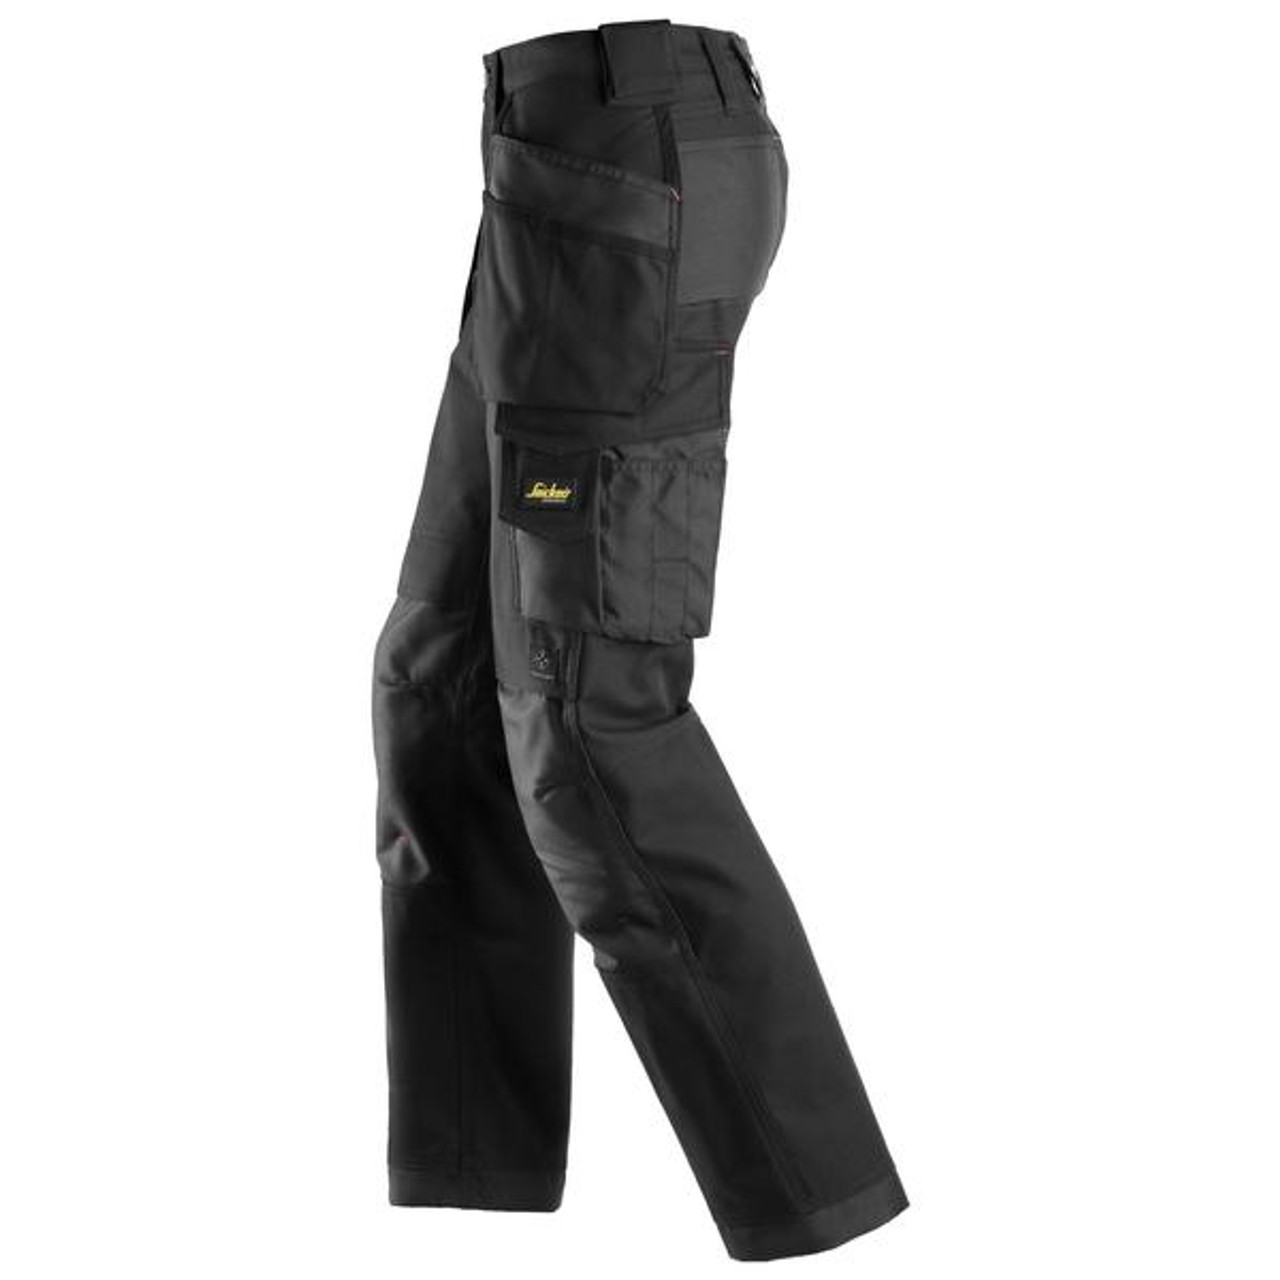 Buy online in Australia, New Zealand and Canada SNICKERS Canvas Black Trousers for Electricians that have Kneepad Pockets